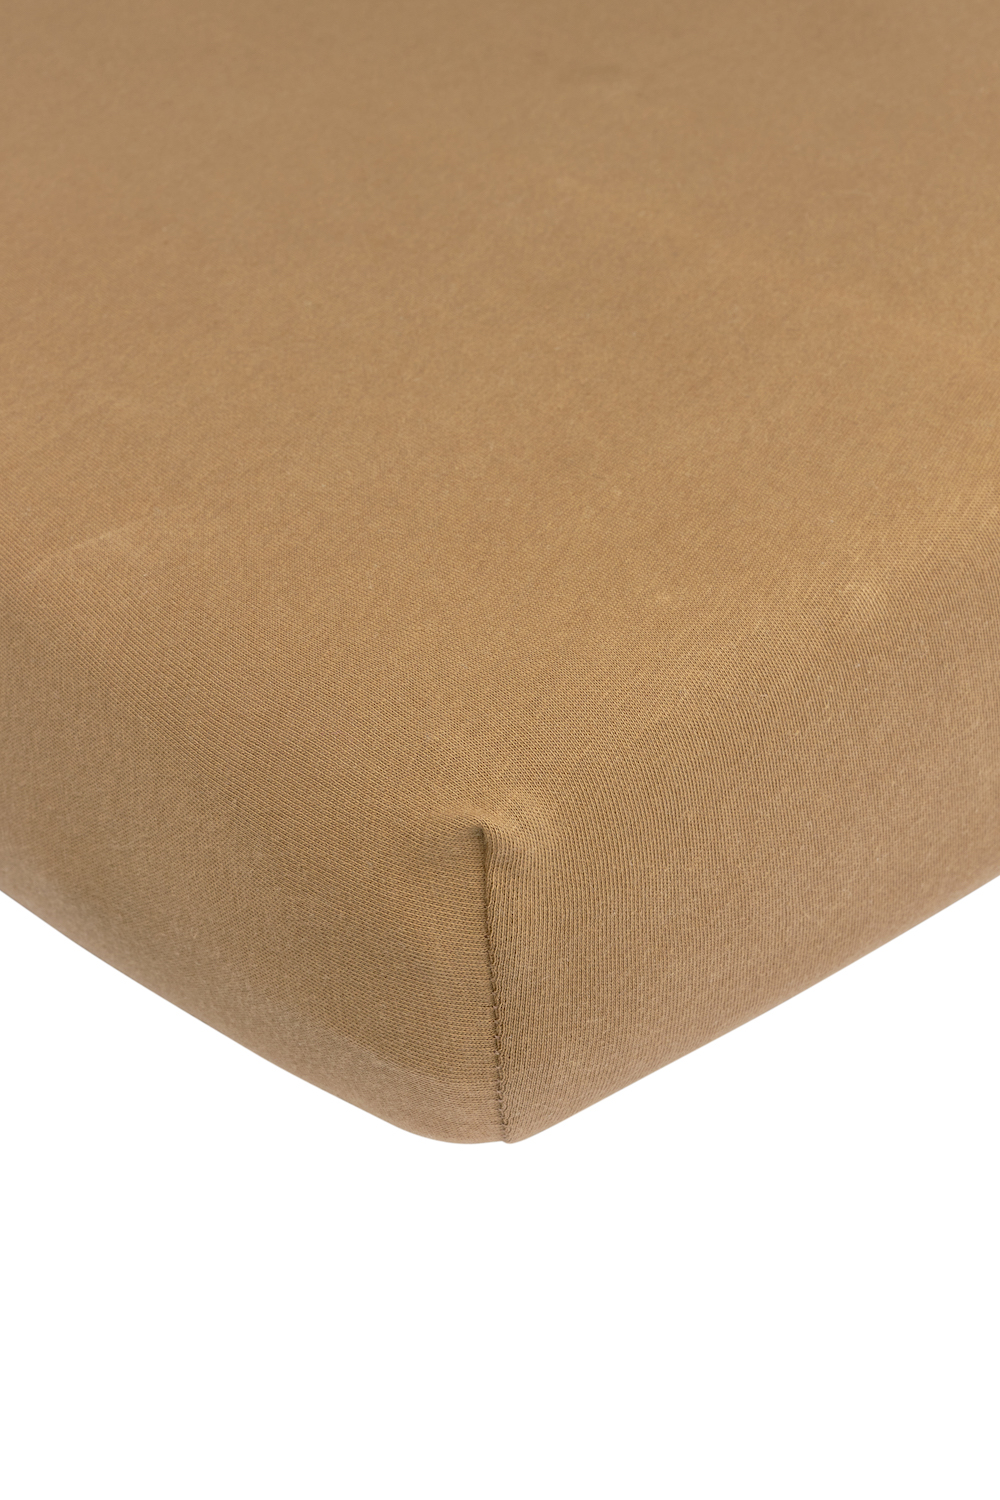 Jersey Fitted Sheet Cot Bed - Toffee - 60x120cm